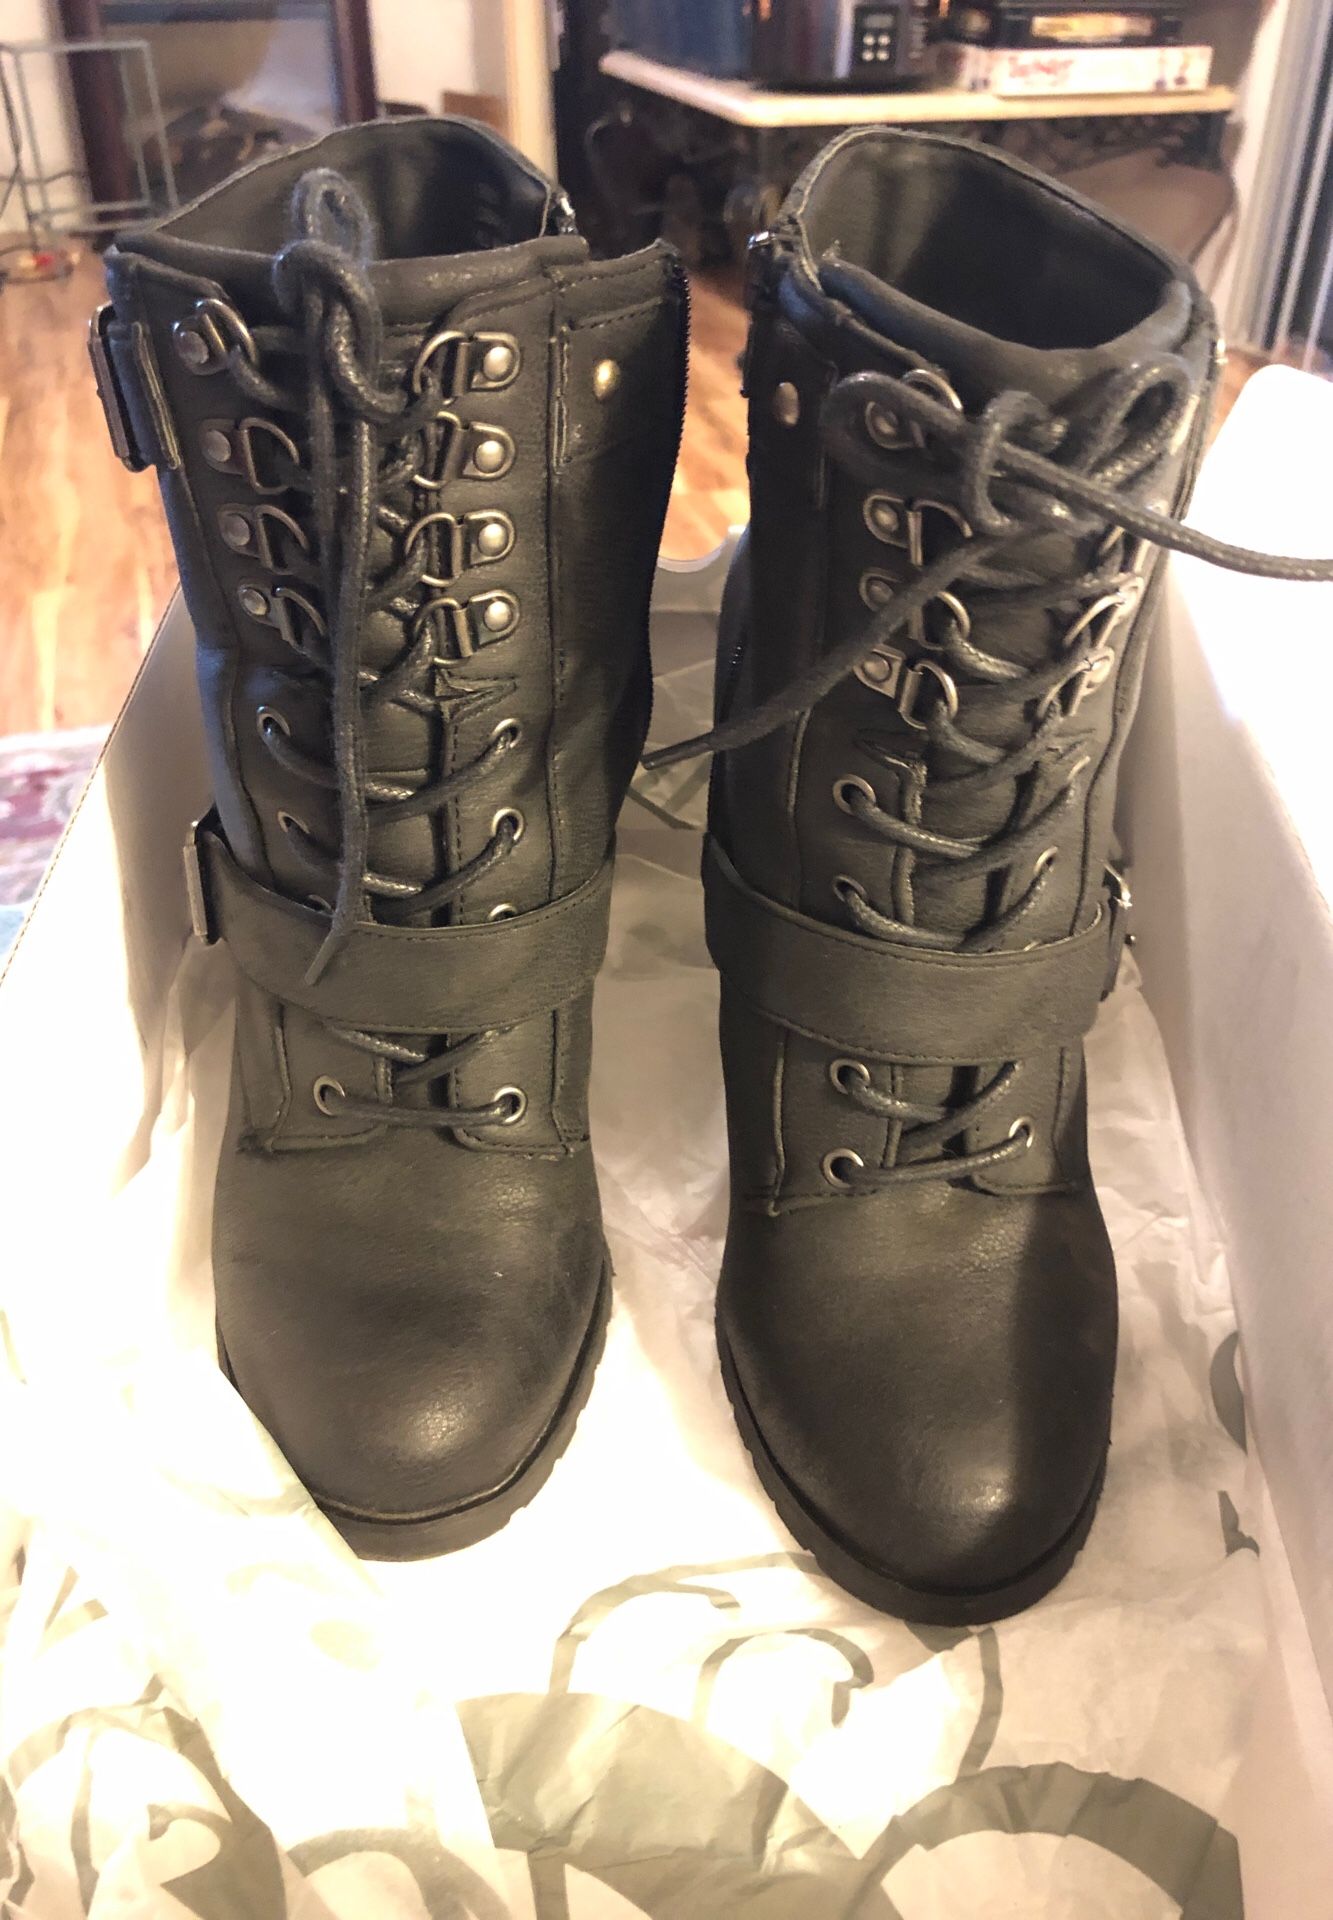 SHI by Journeys boots size 8.5